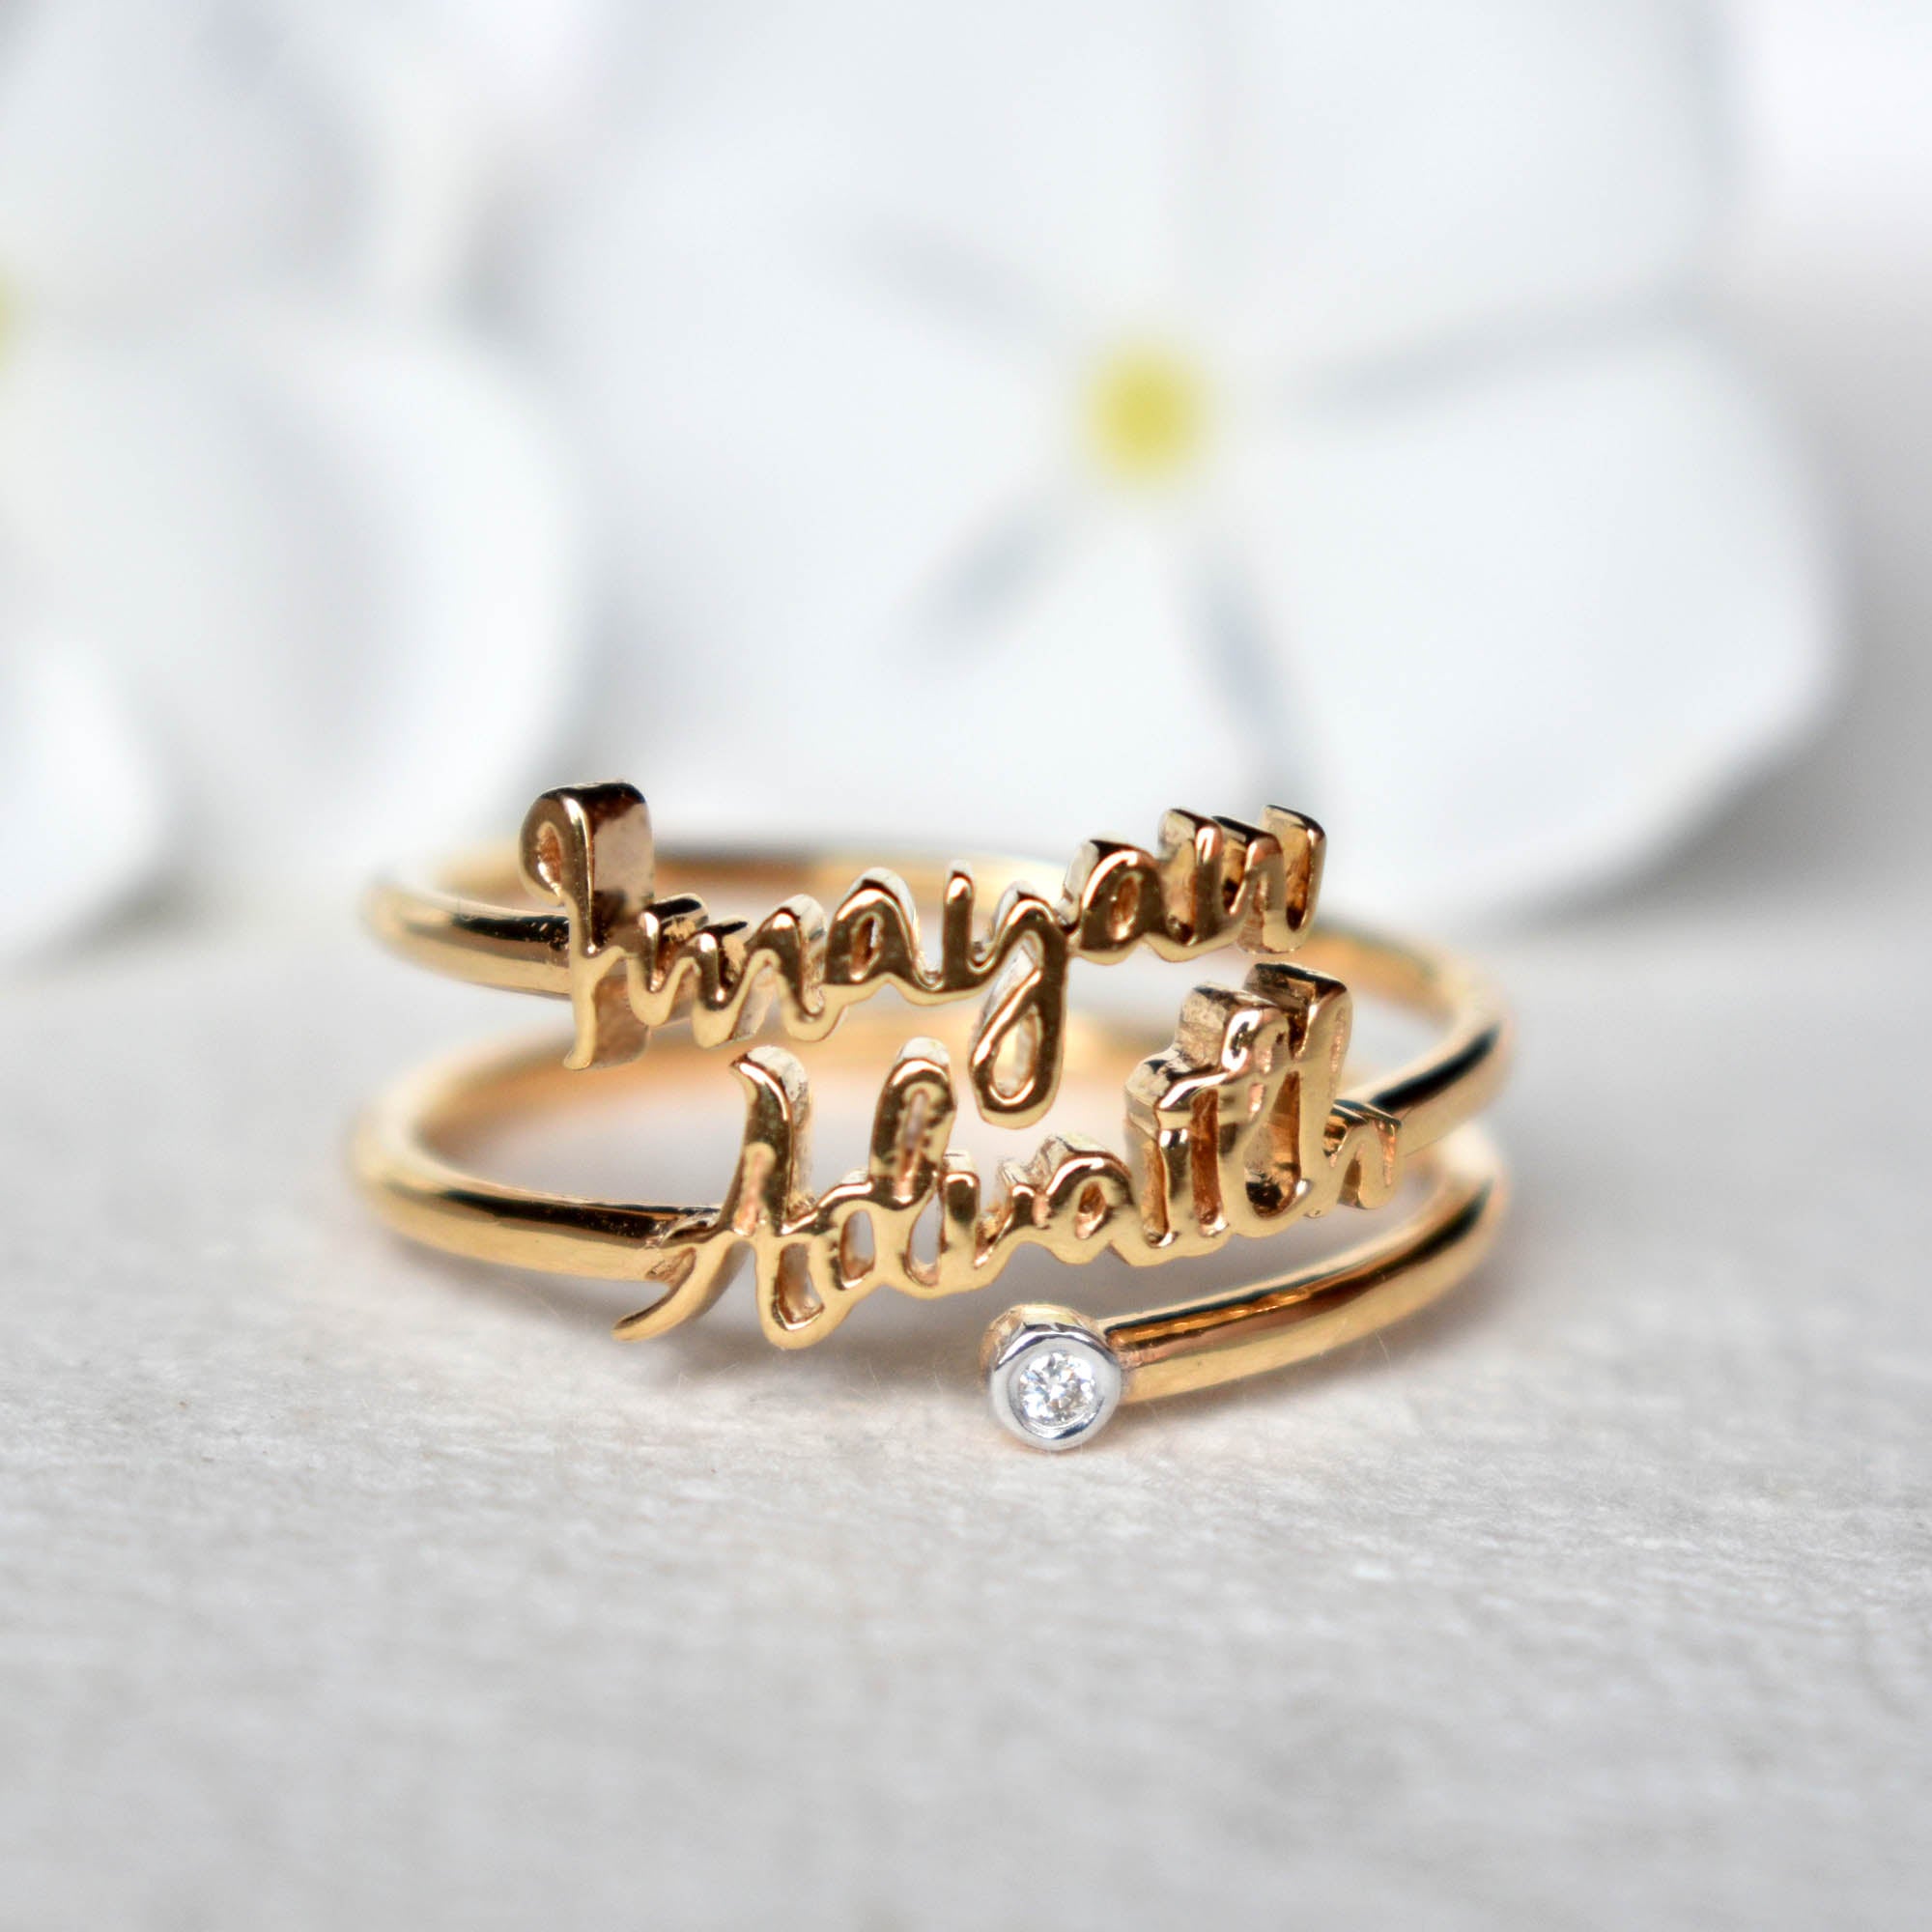 Buy 14K 18K Solid Gold Duo Name Ring, Custom One Two or Three Names Ring,  Single Double Triple Name Ring, Personalized Gift for Her Online in India -  Etsy